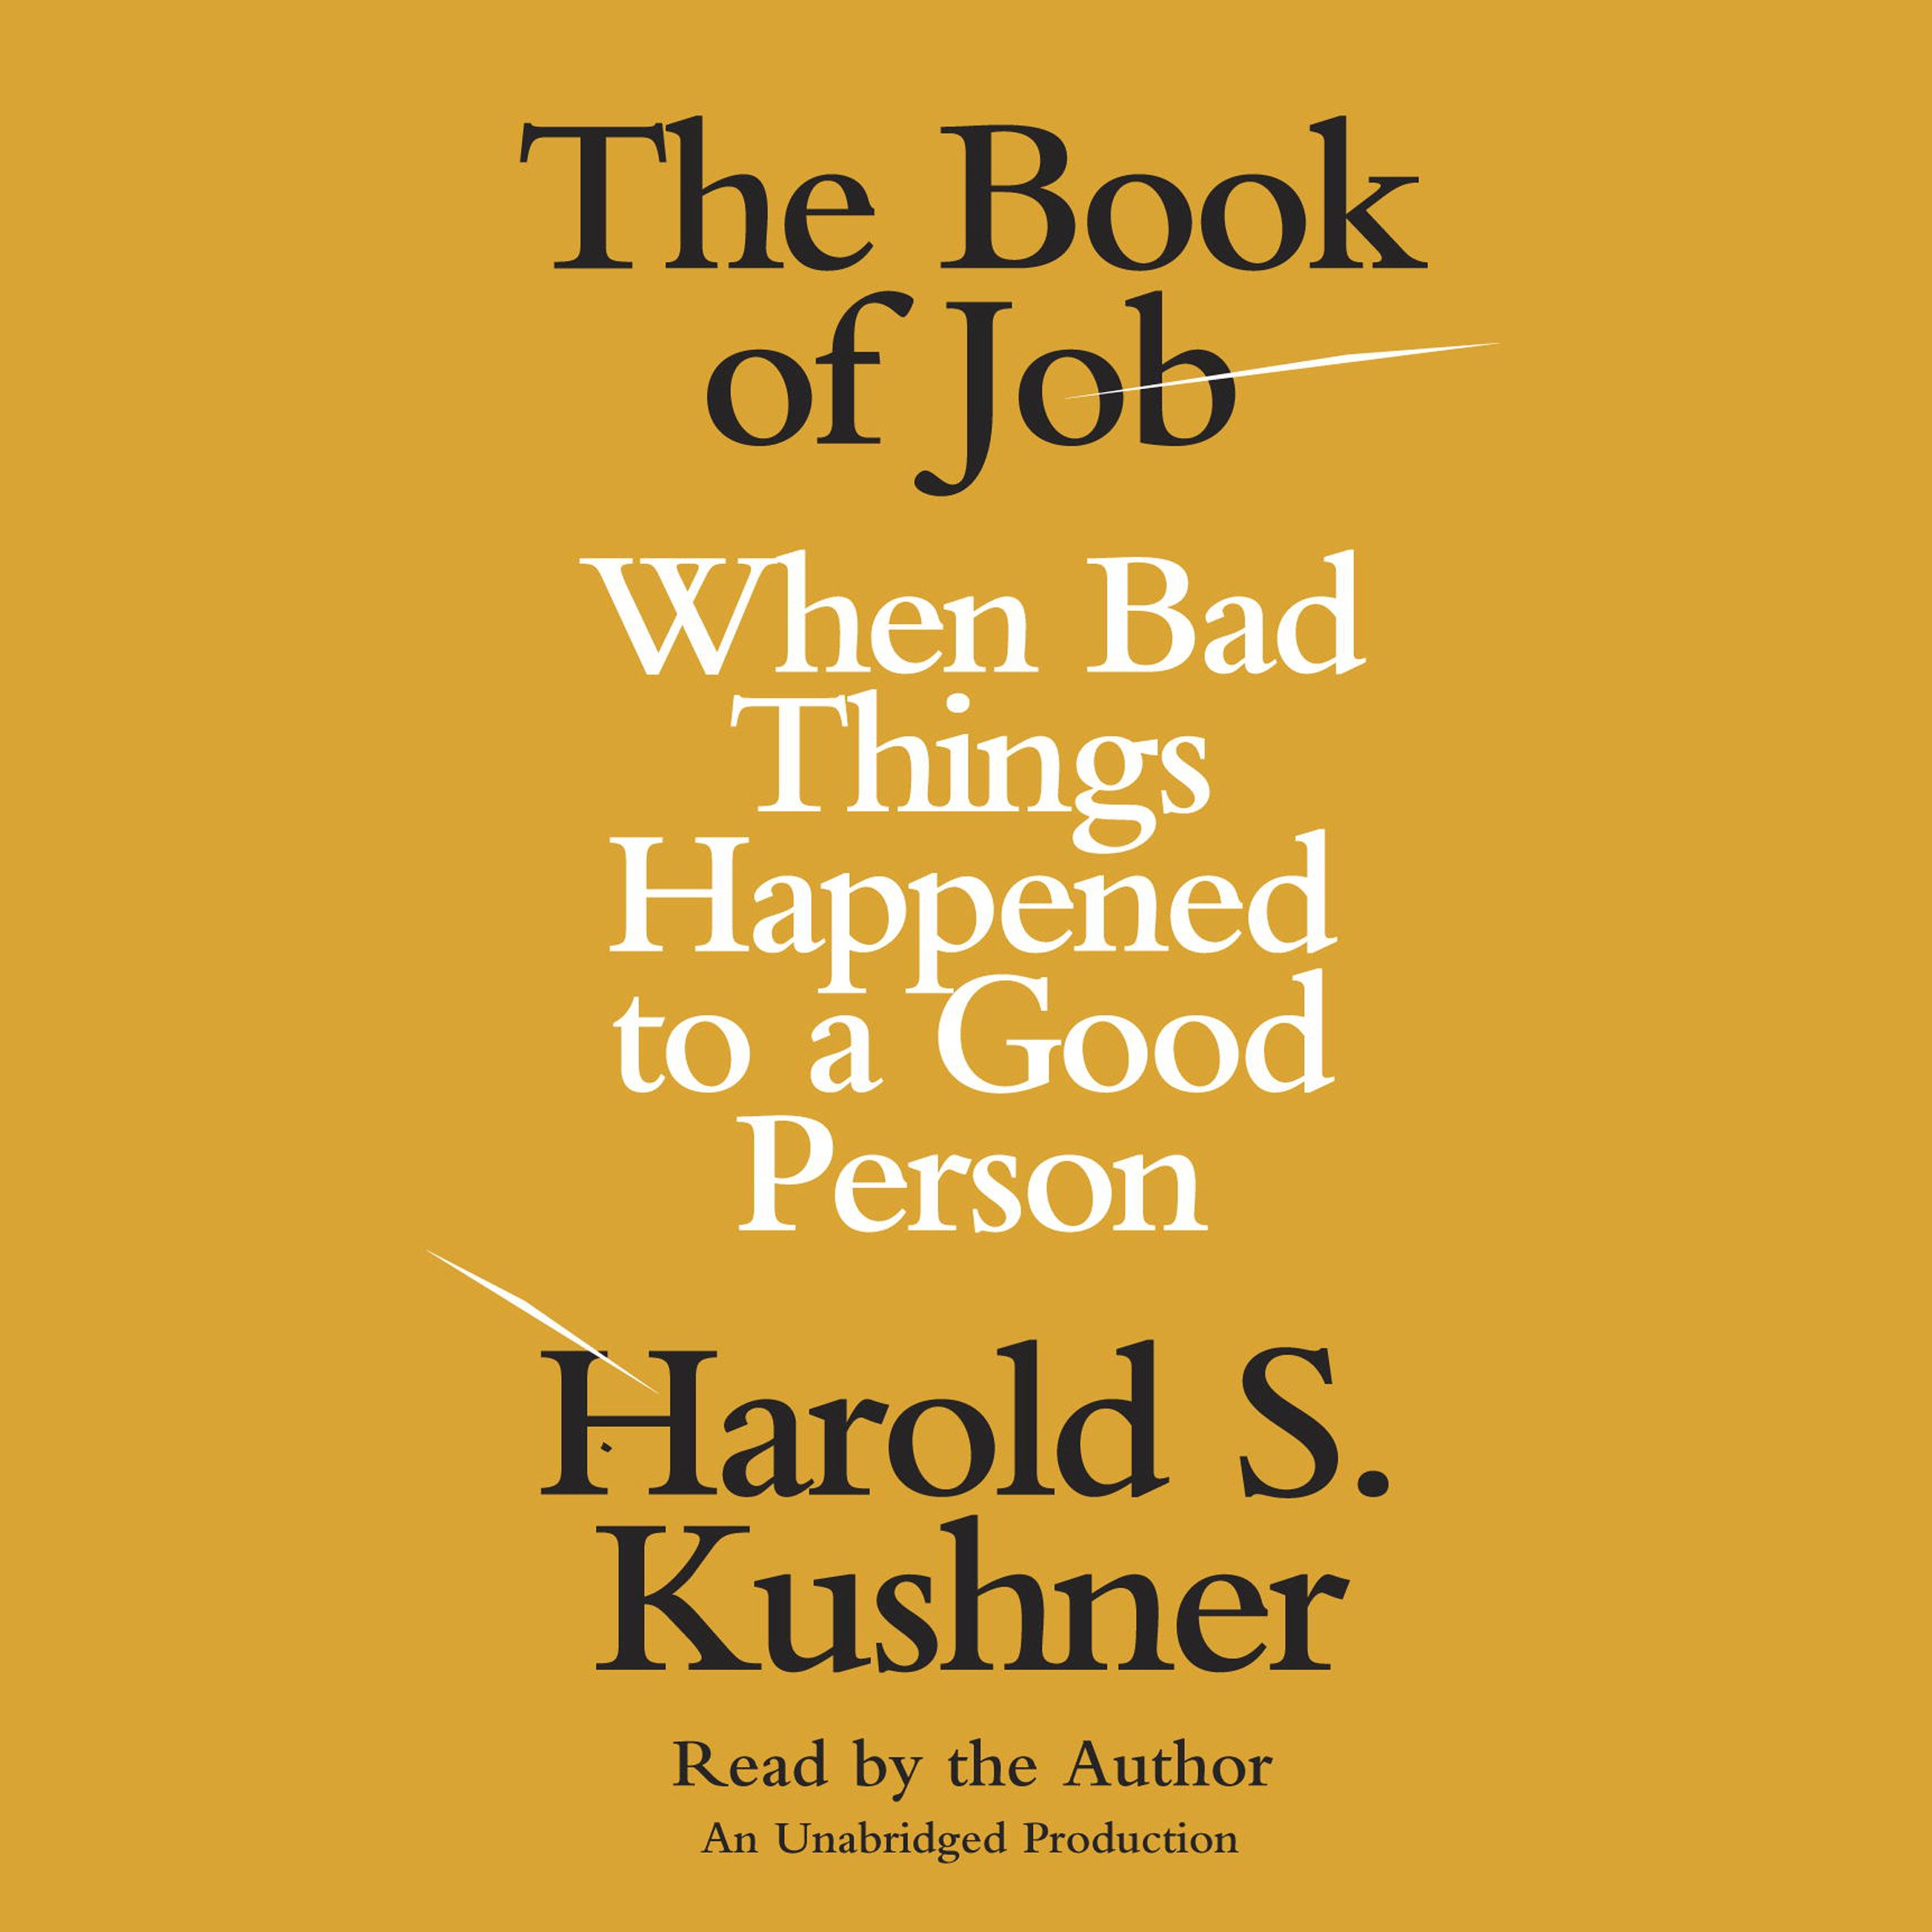 The Book of Job: When Bad Things Happened to a Good Person